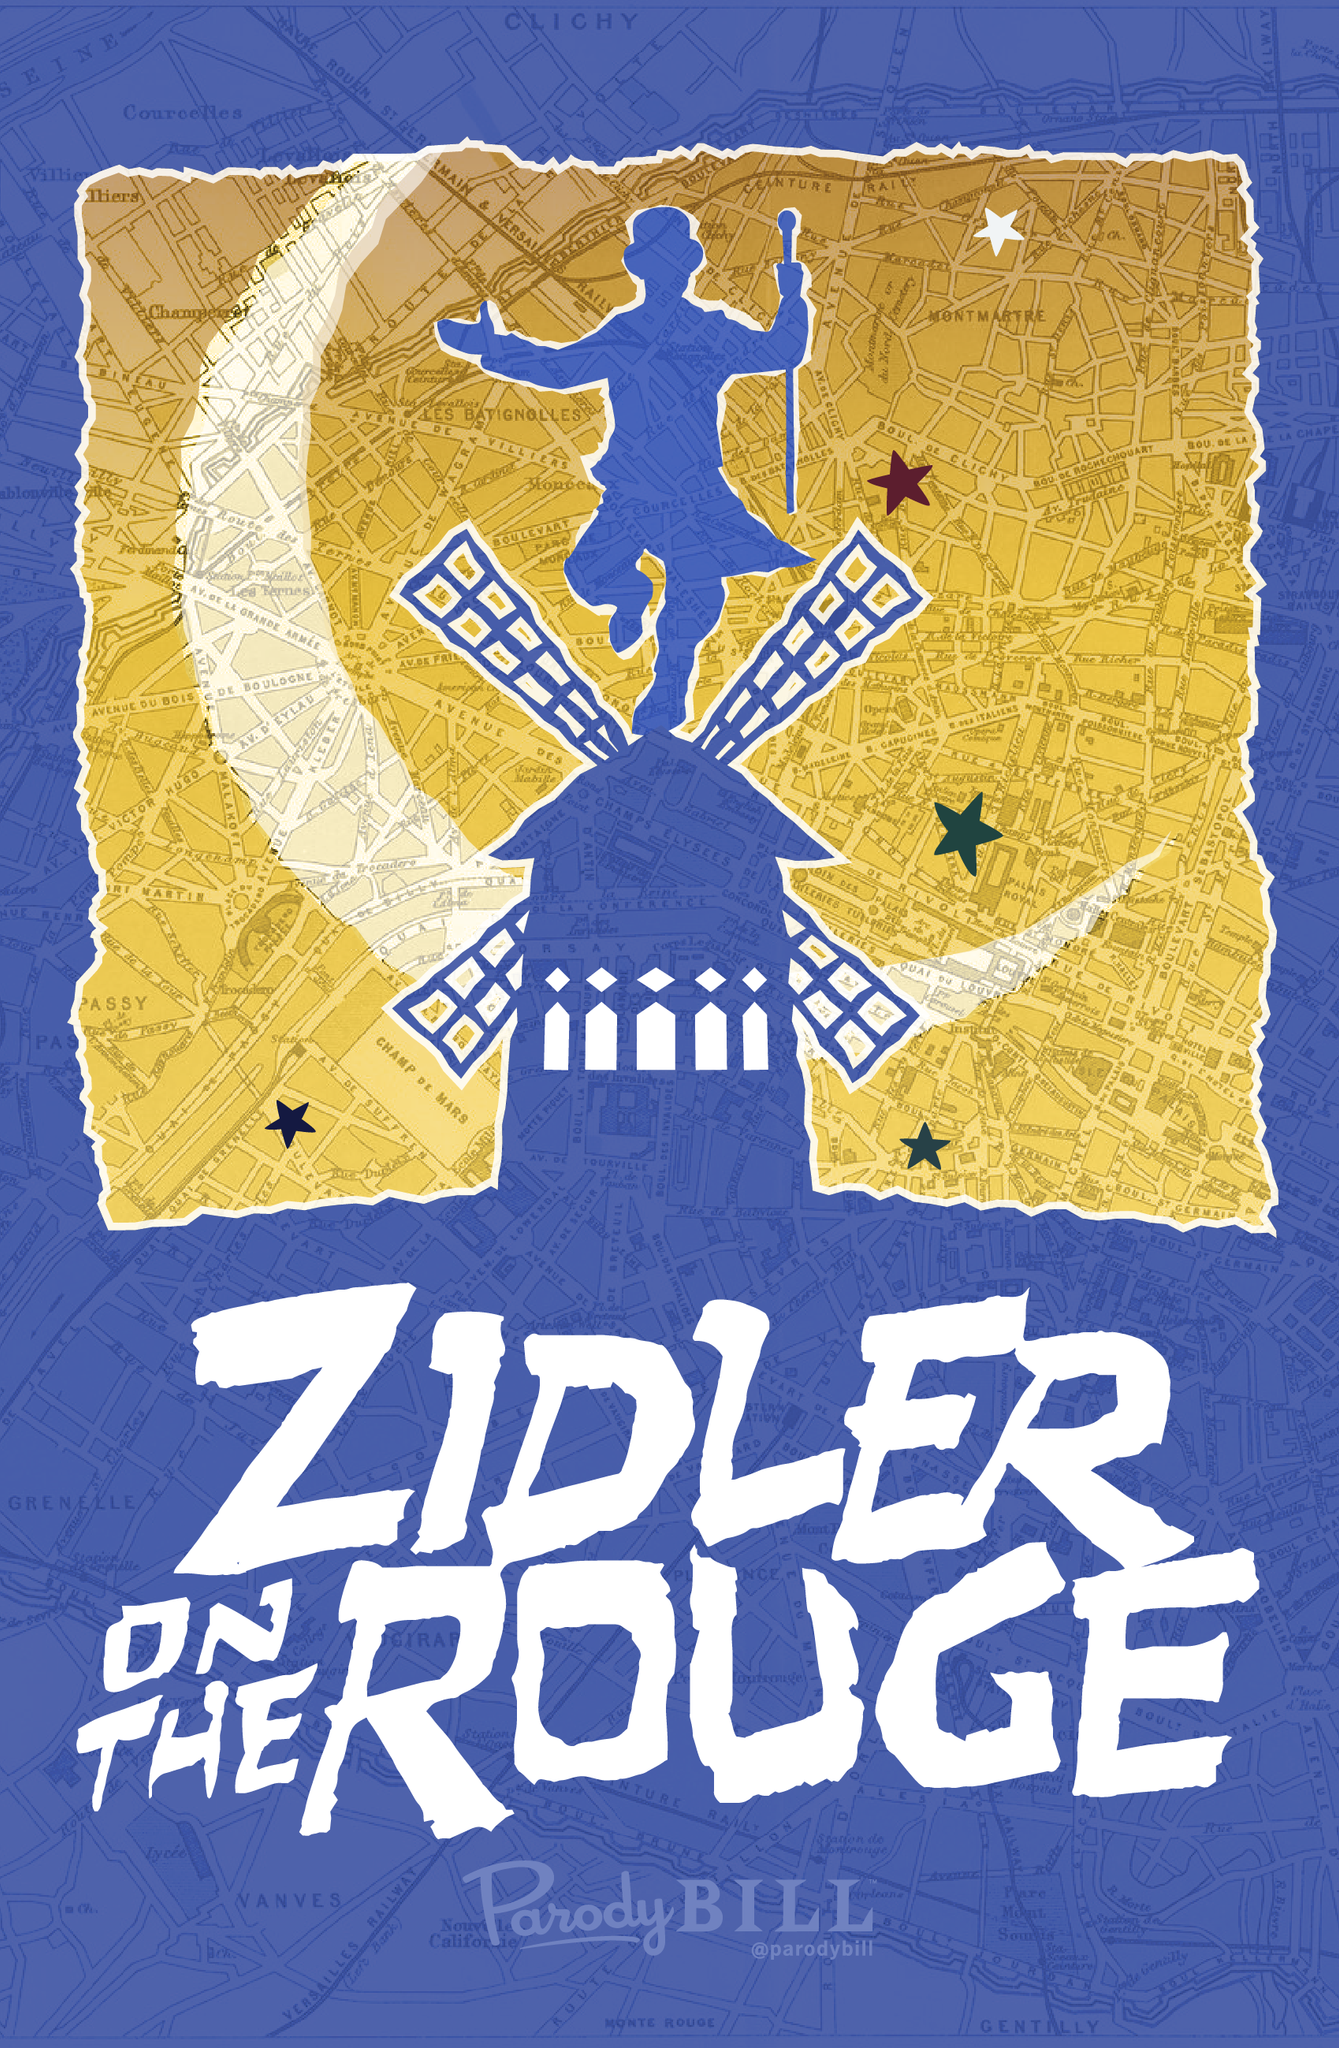 Zidler on the Rouge Print